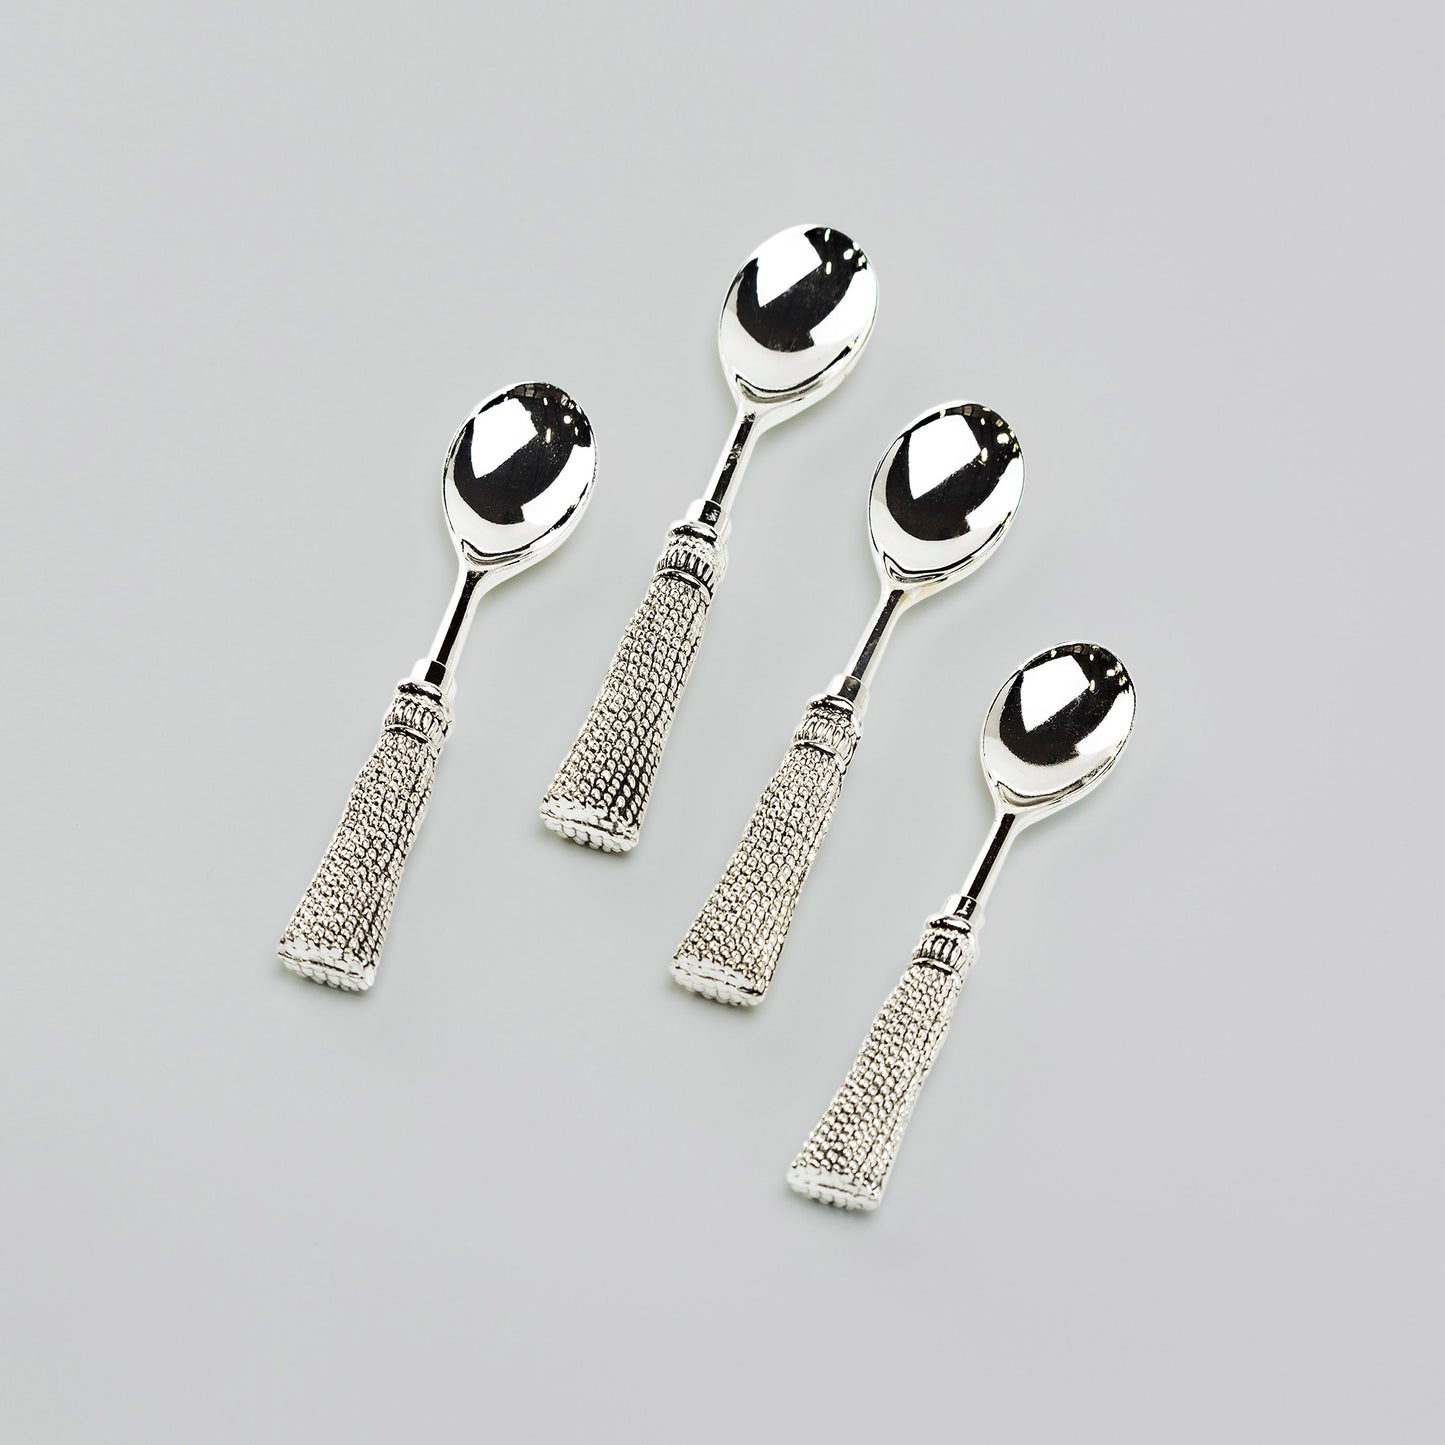 Silver Plated Demi Spoon Set of 4 with Tassel Handle Design